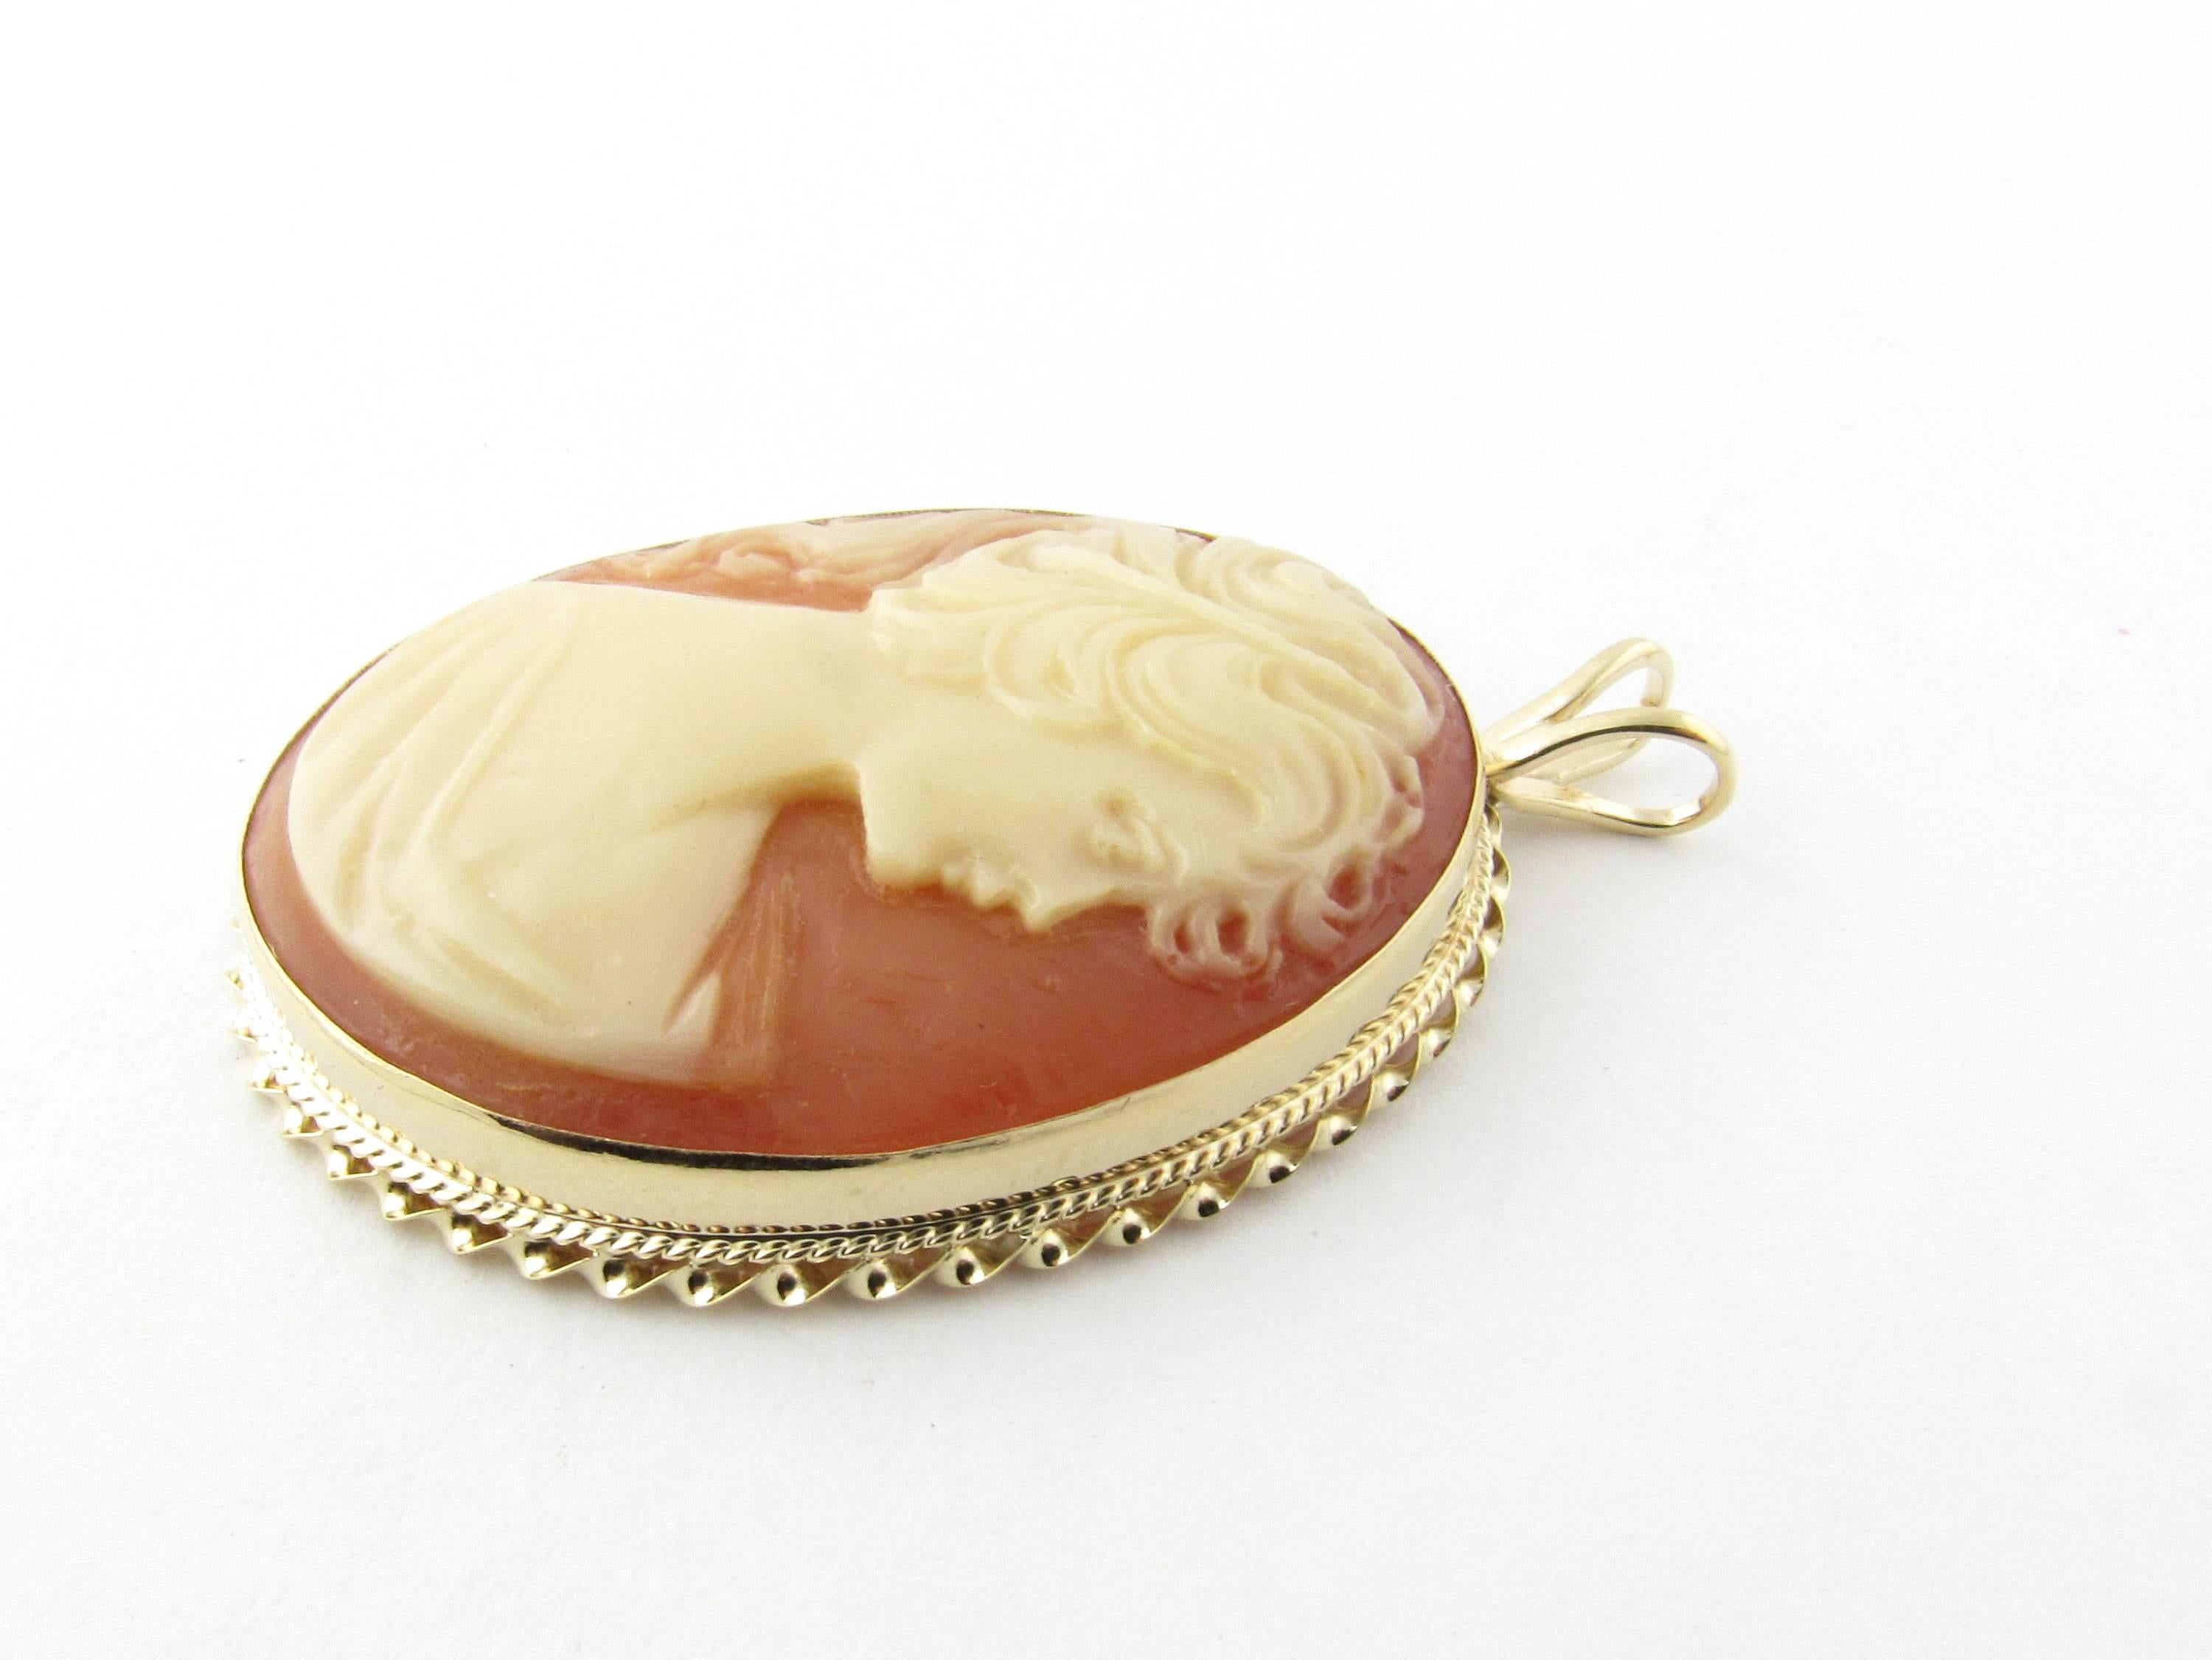 Vintage 14 Karat Yellow Gold Cameo Pendant-

This stunning cameo pendant features a lovely lady in profile framed in meticulously detailed 14K yellow gold.

Size: 50 mm x 33 mm (actual charm)

Weight: 5.0 dwt. / 7.9 gr.

Hallmark: Acid tested for